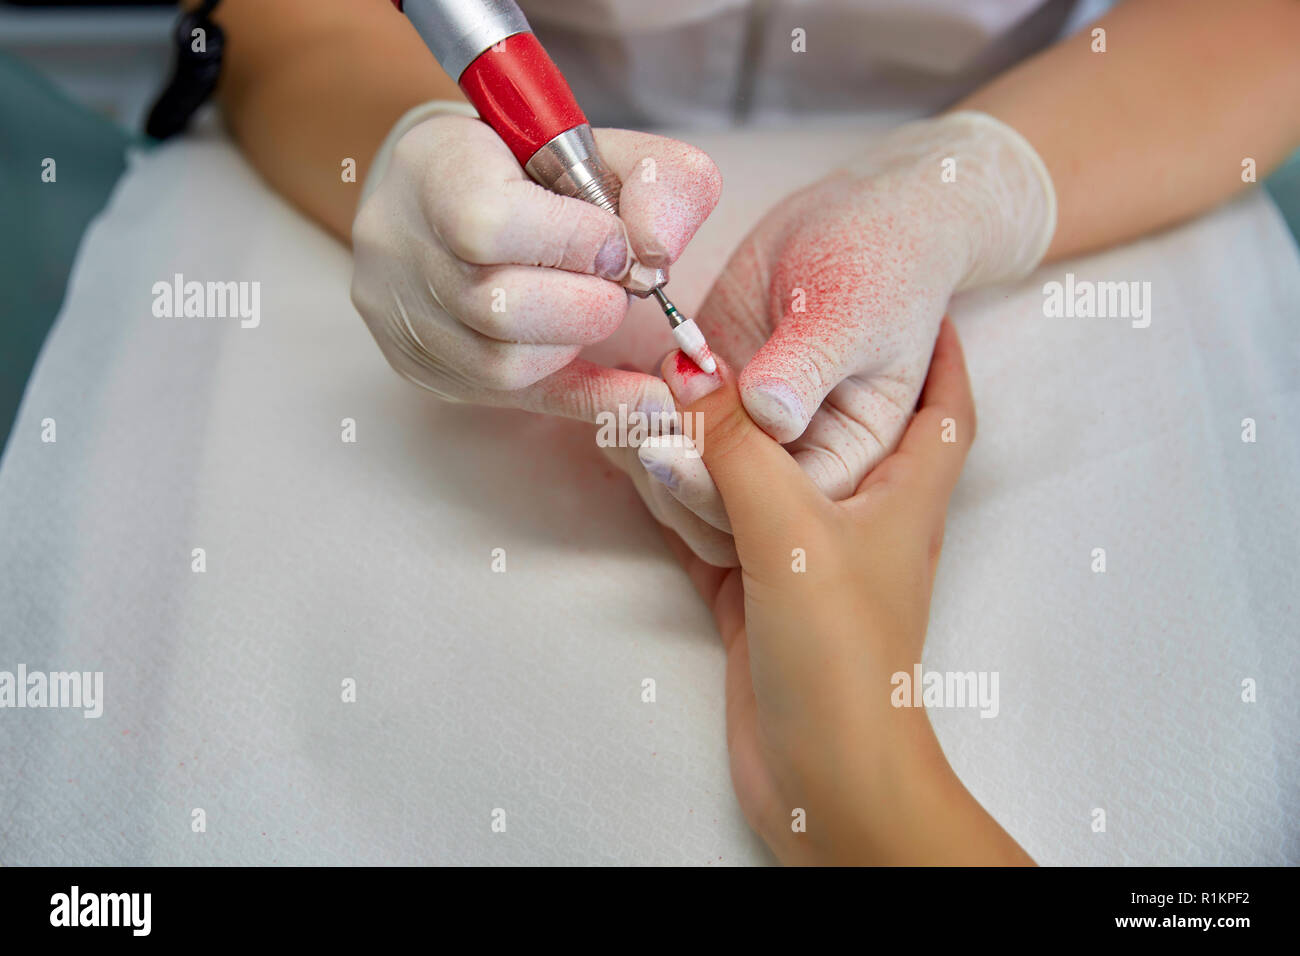 Sawing nails removing manicure, professional work in the beauty salon Stock Photo